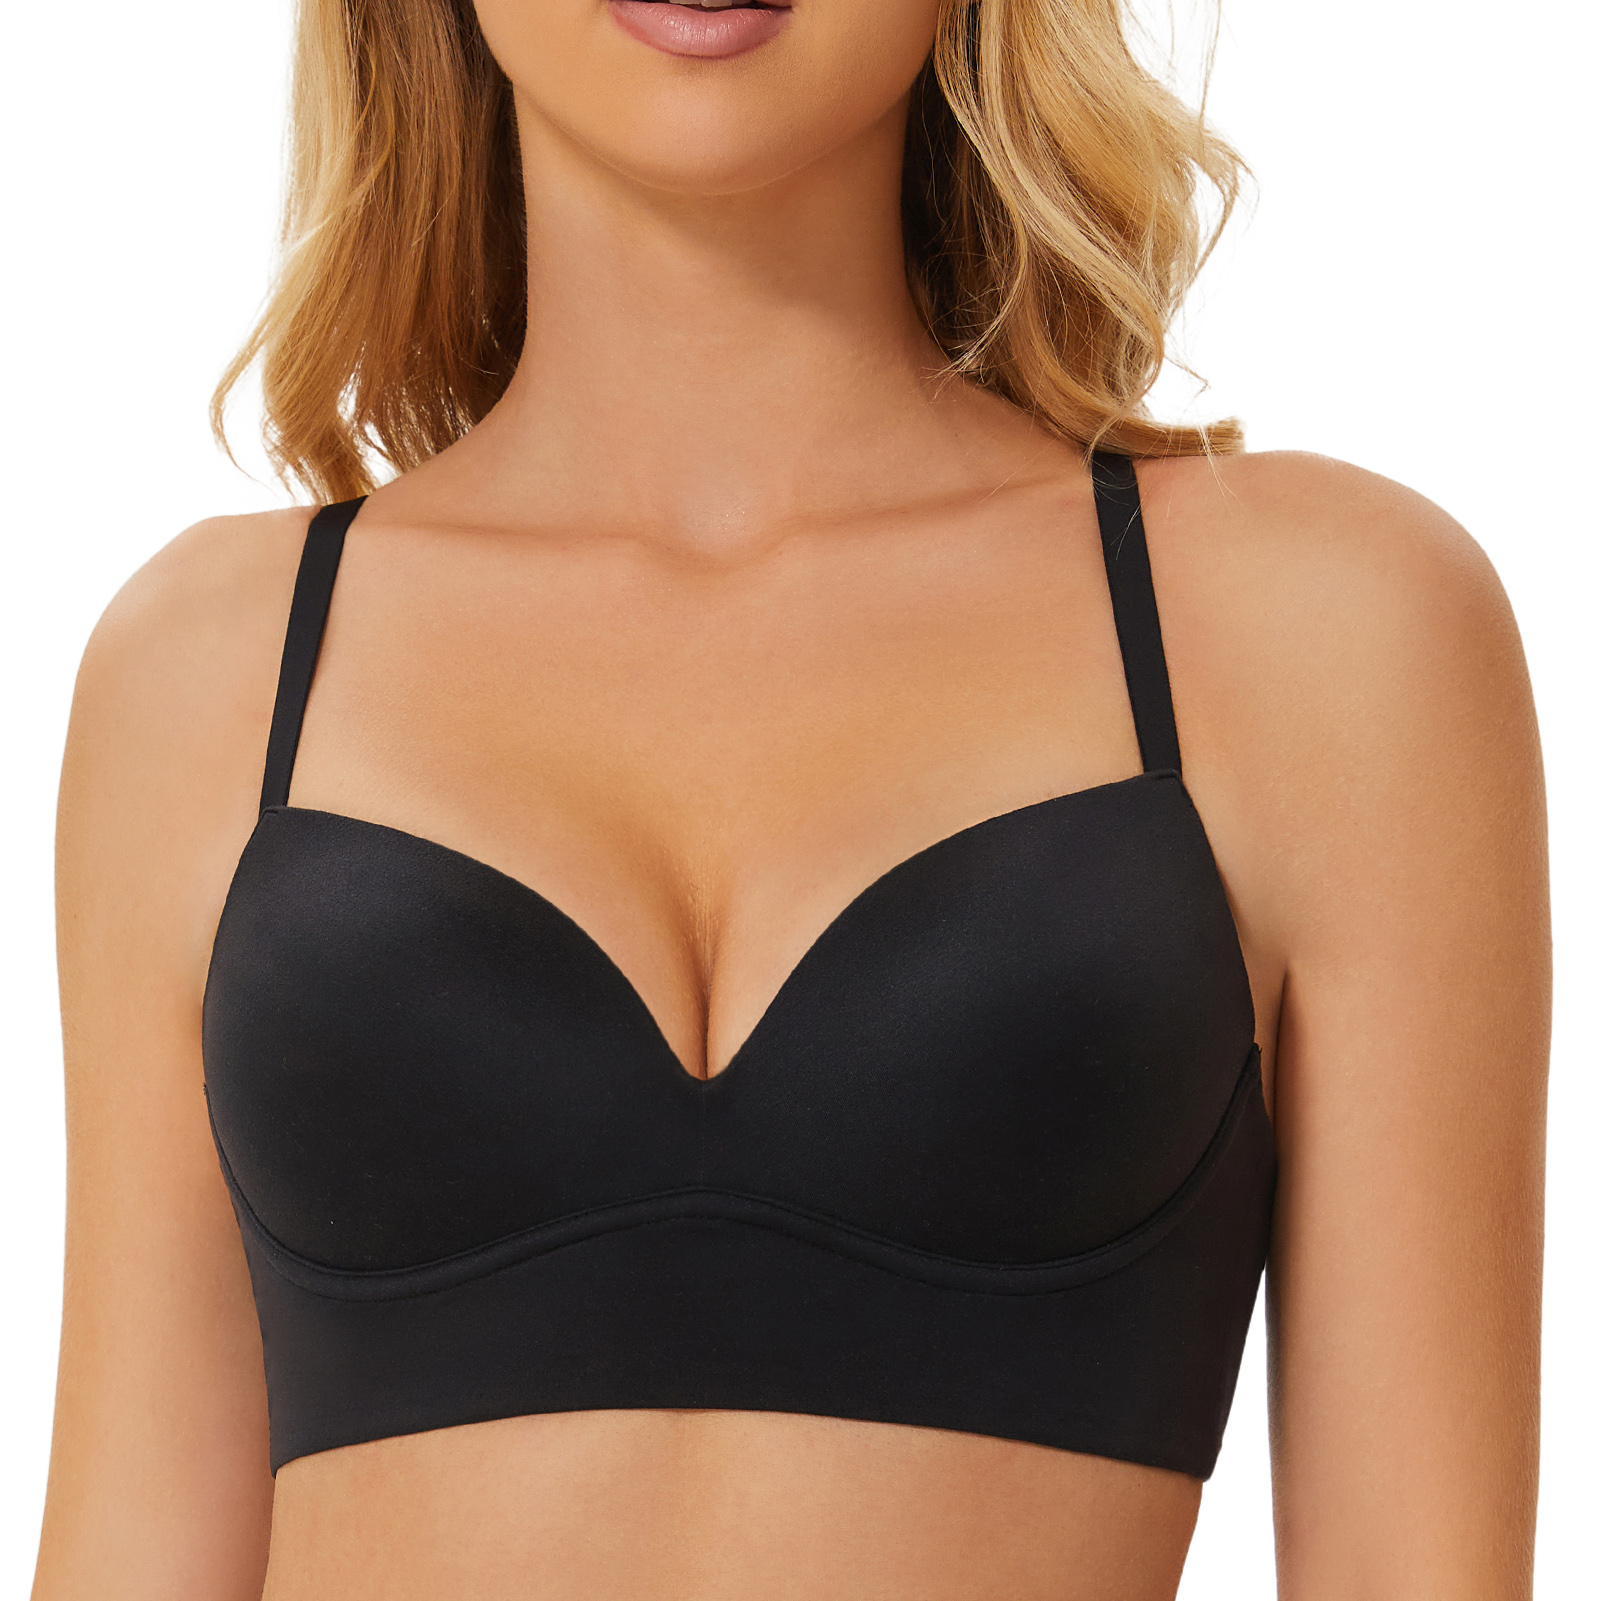 Meleneca, women's front closing bra, large sizes, with an